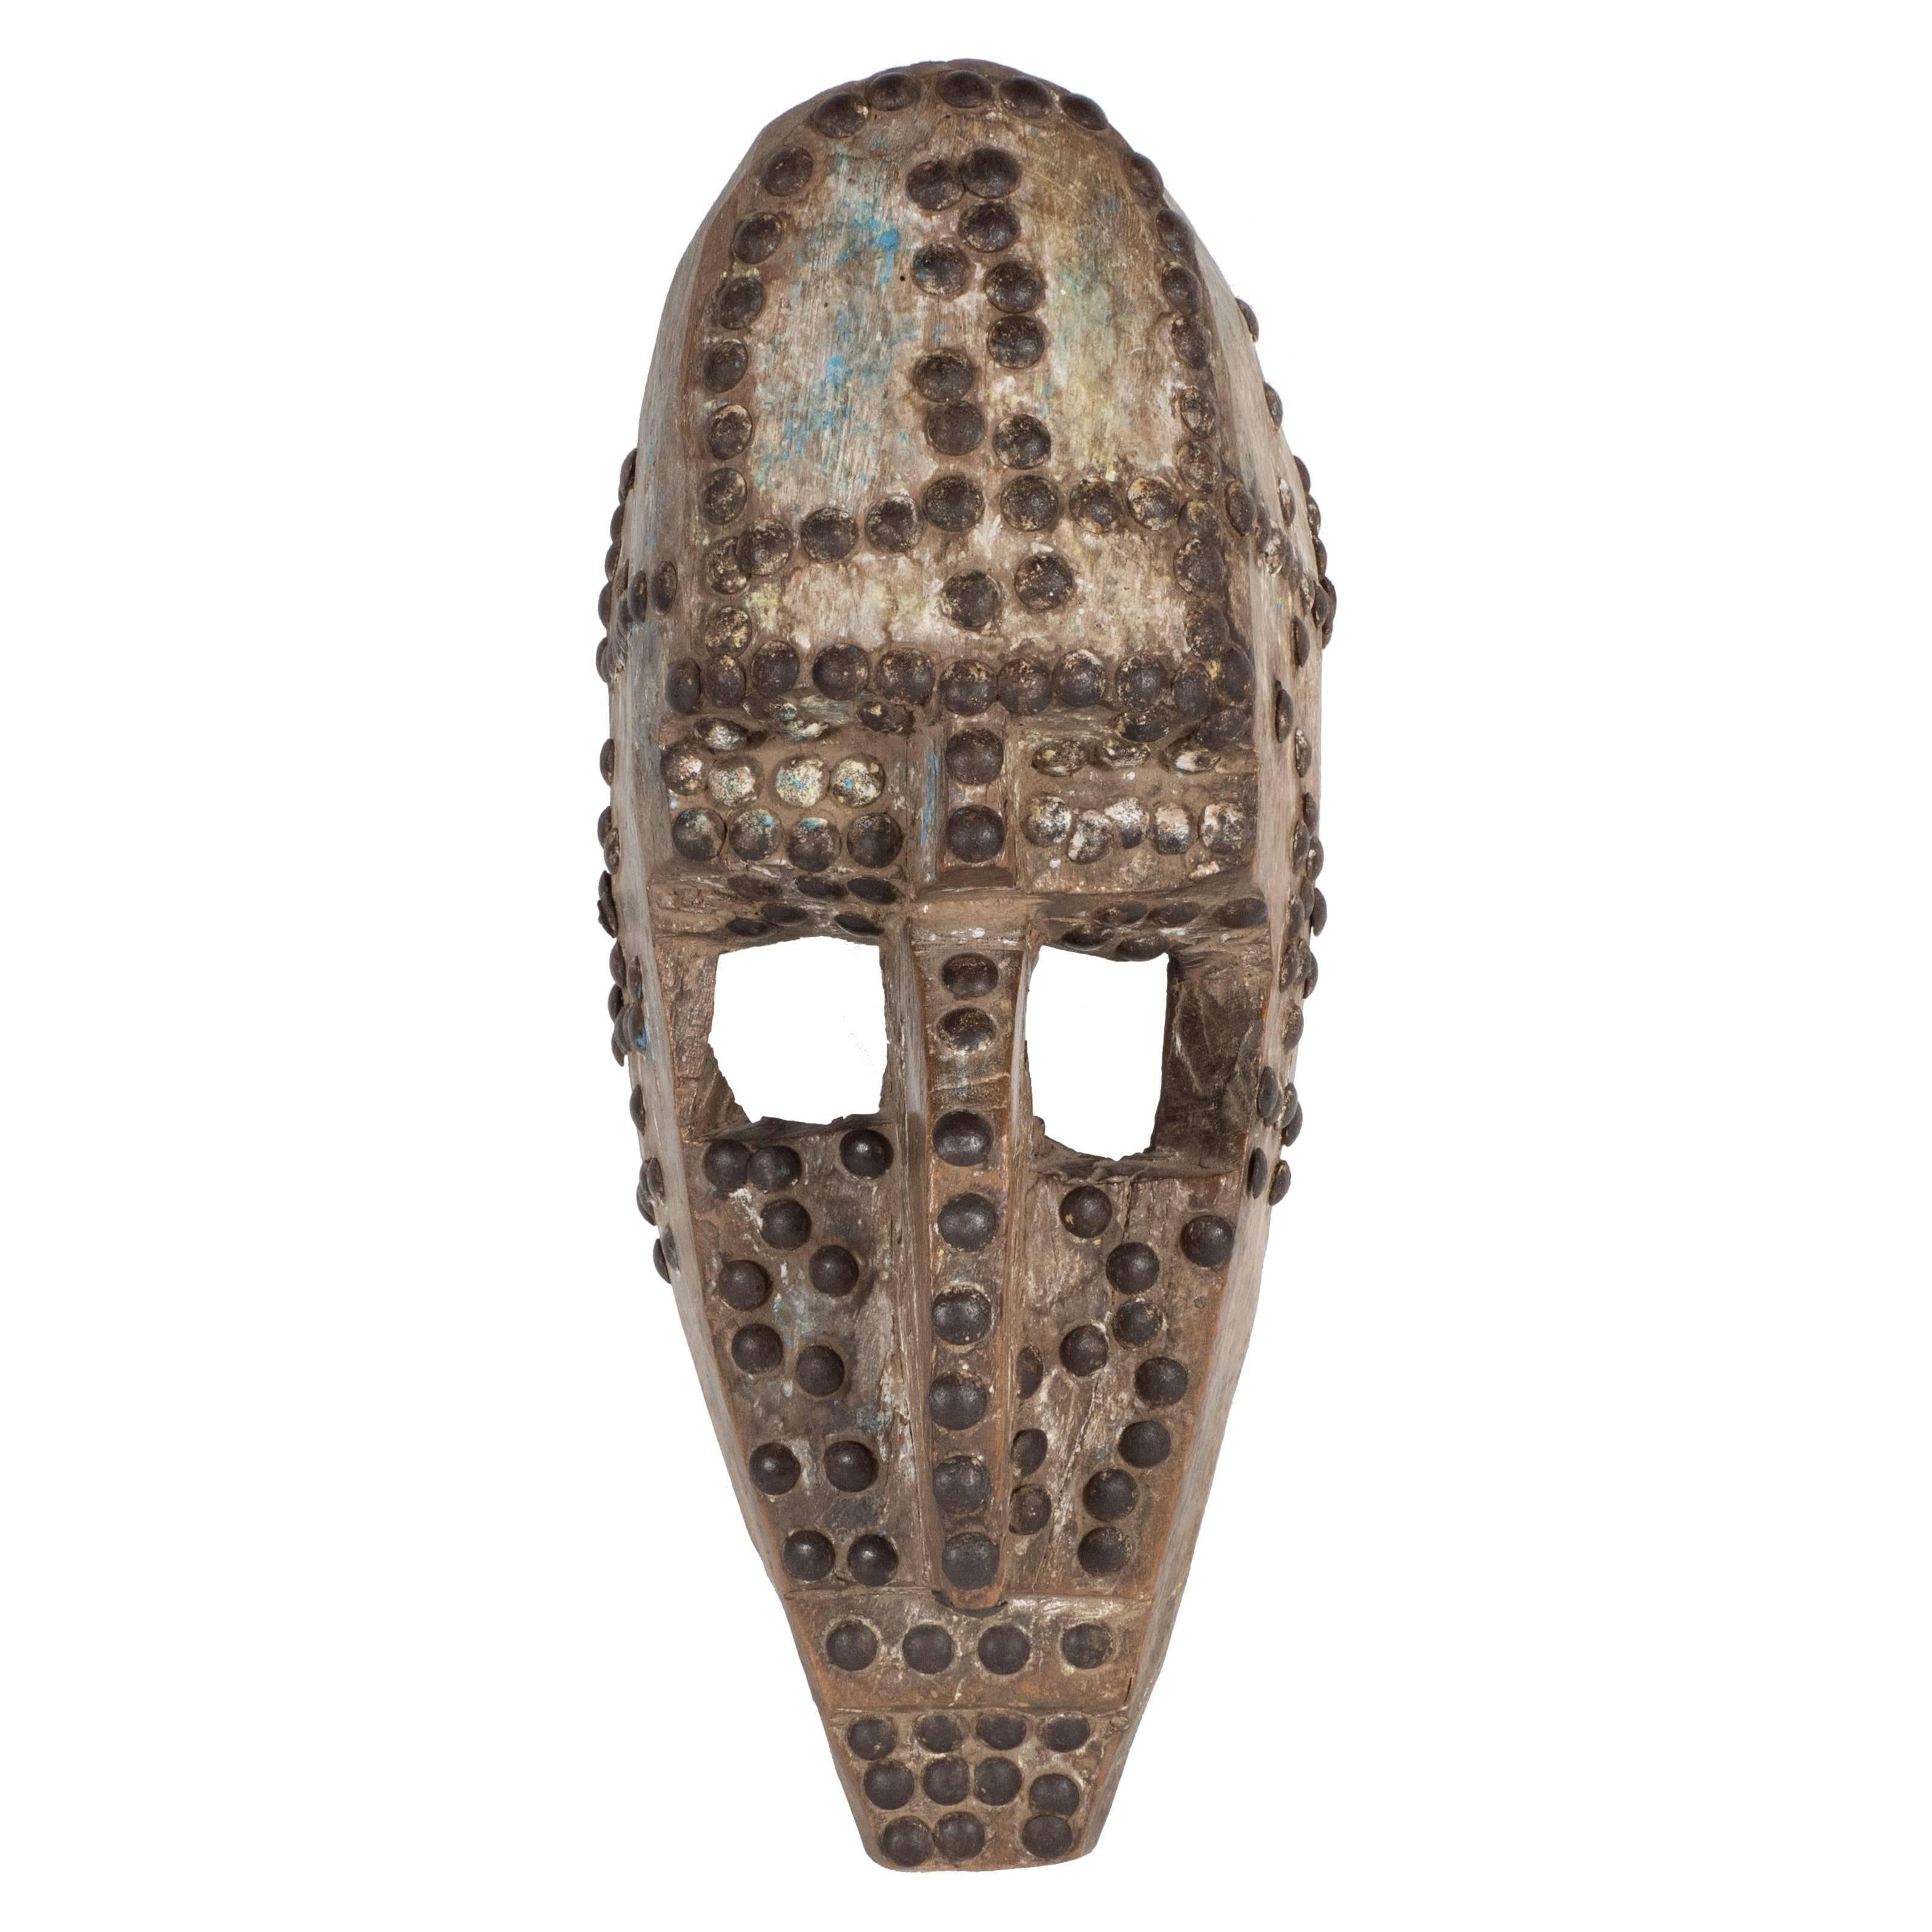 Unknown Figurative Sculpture - 19th Century African Marka Mask from Mali Authenticated by Sotheby's